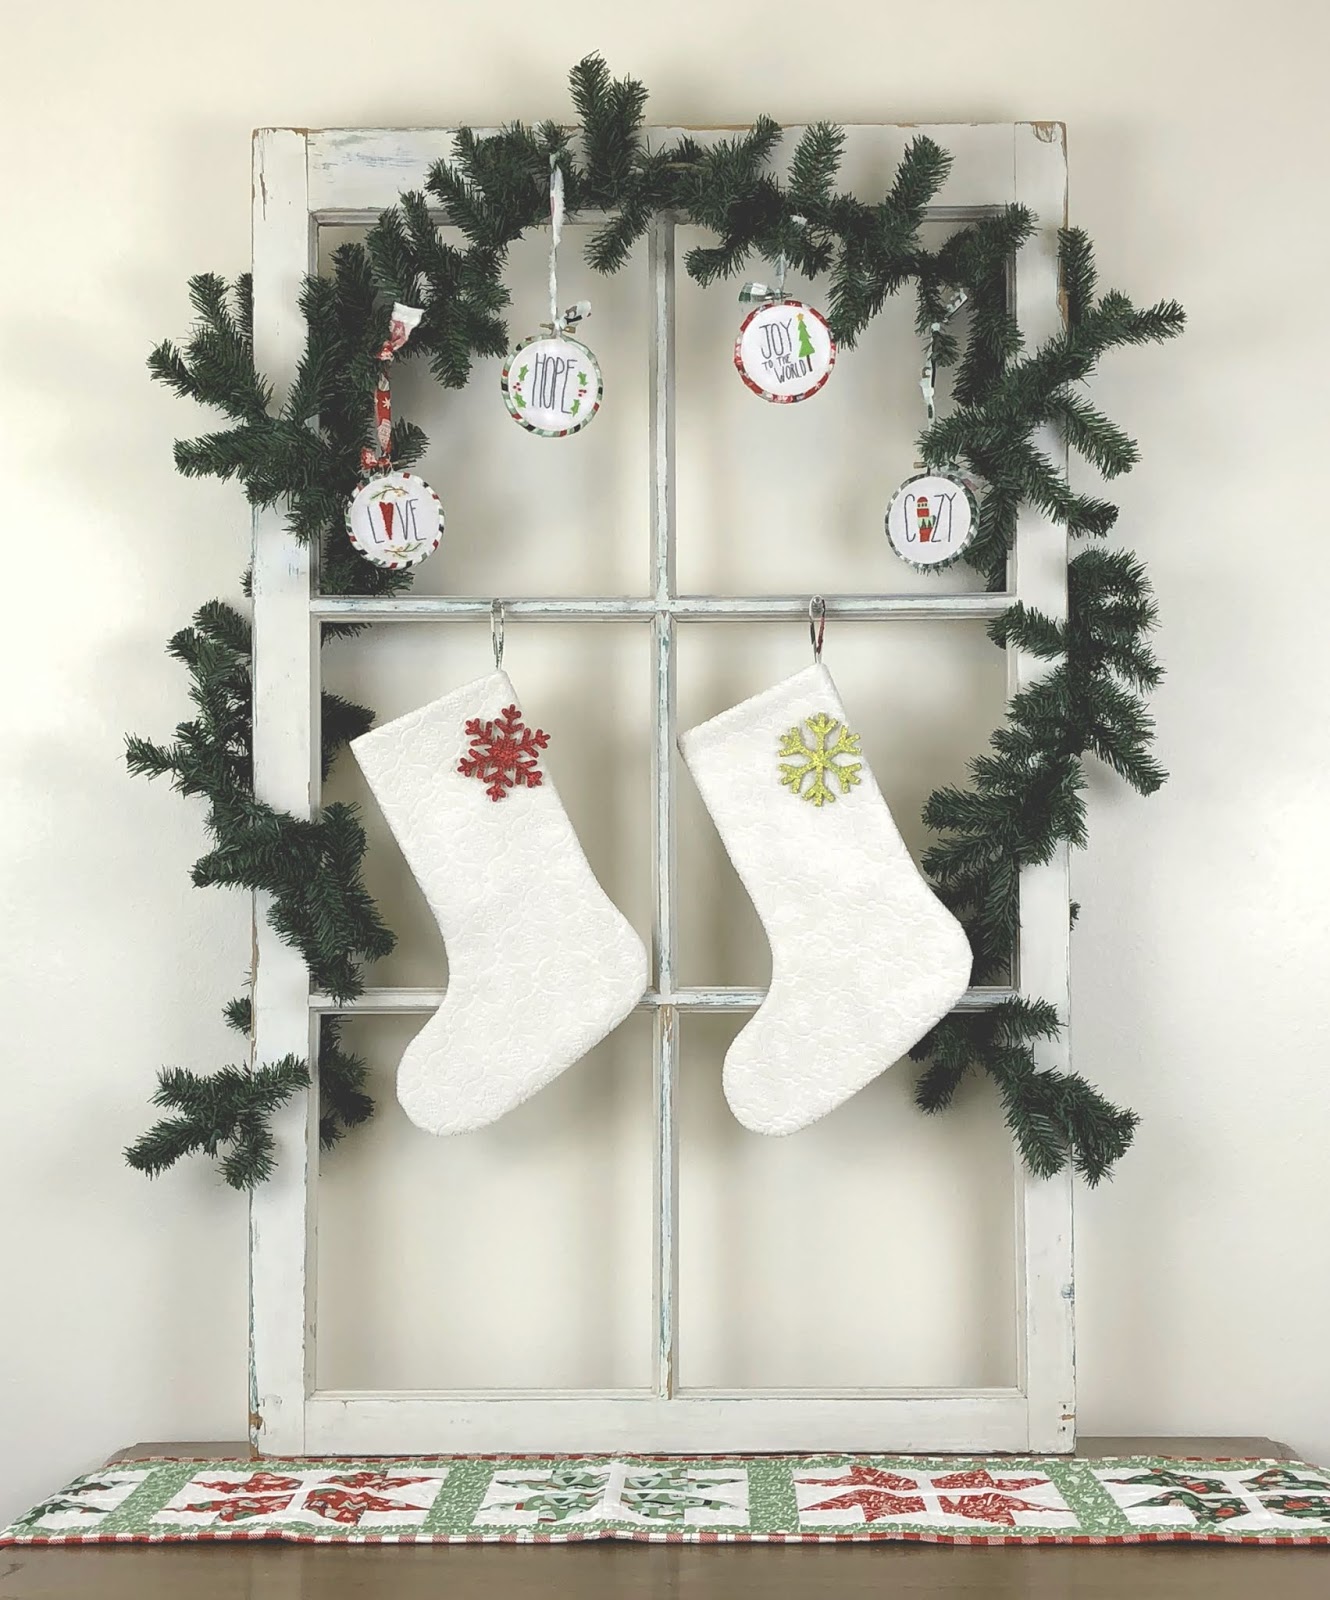 Decorated Christmas stockings with a little fabric paint and some buttons!